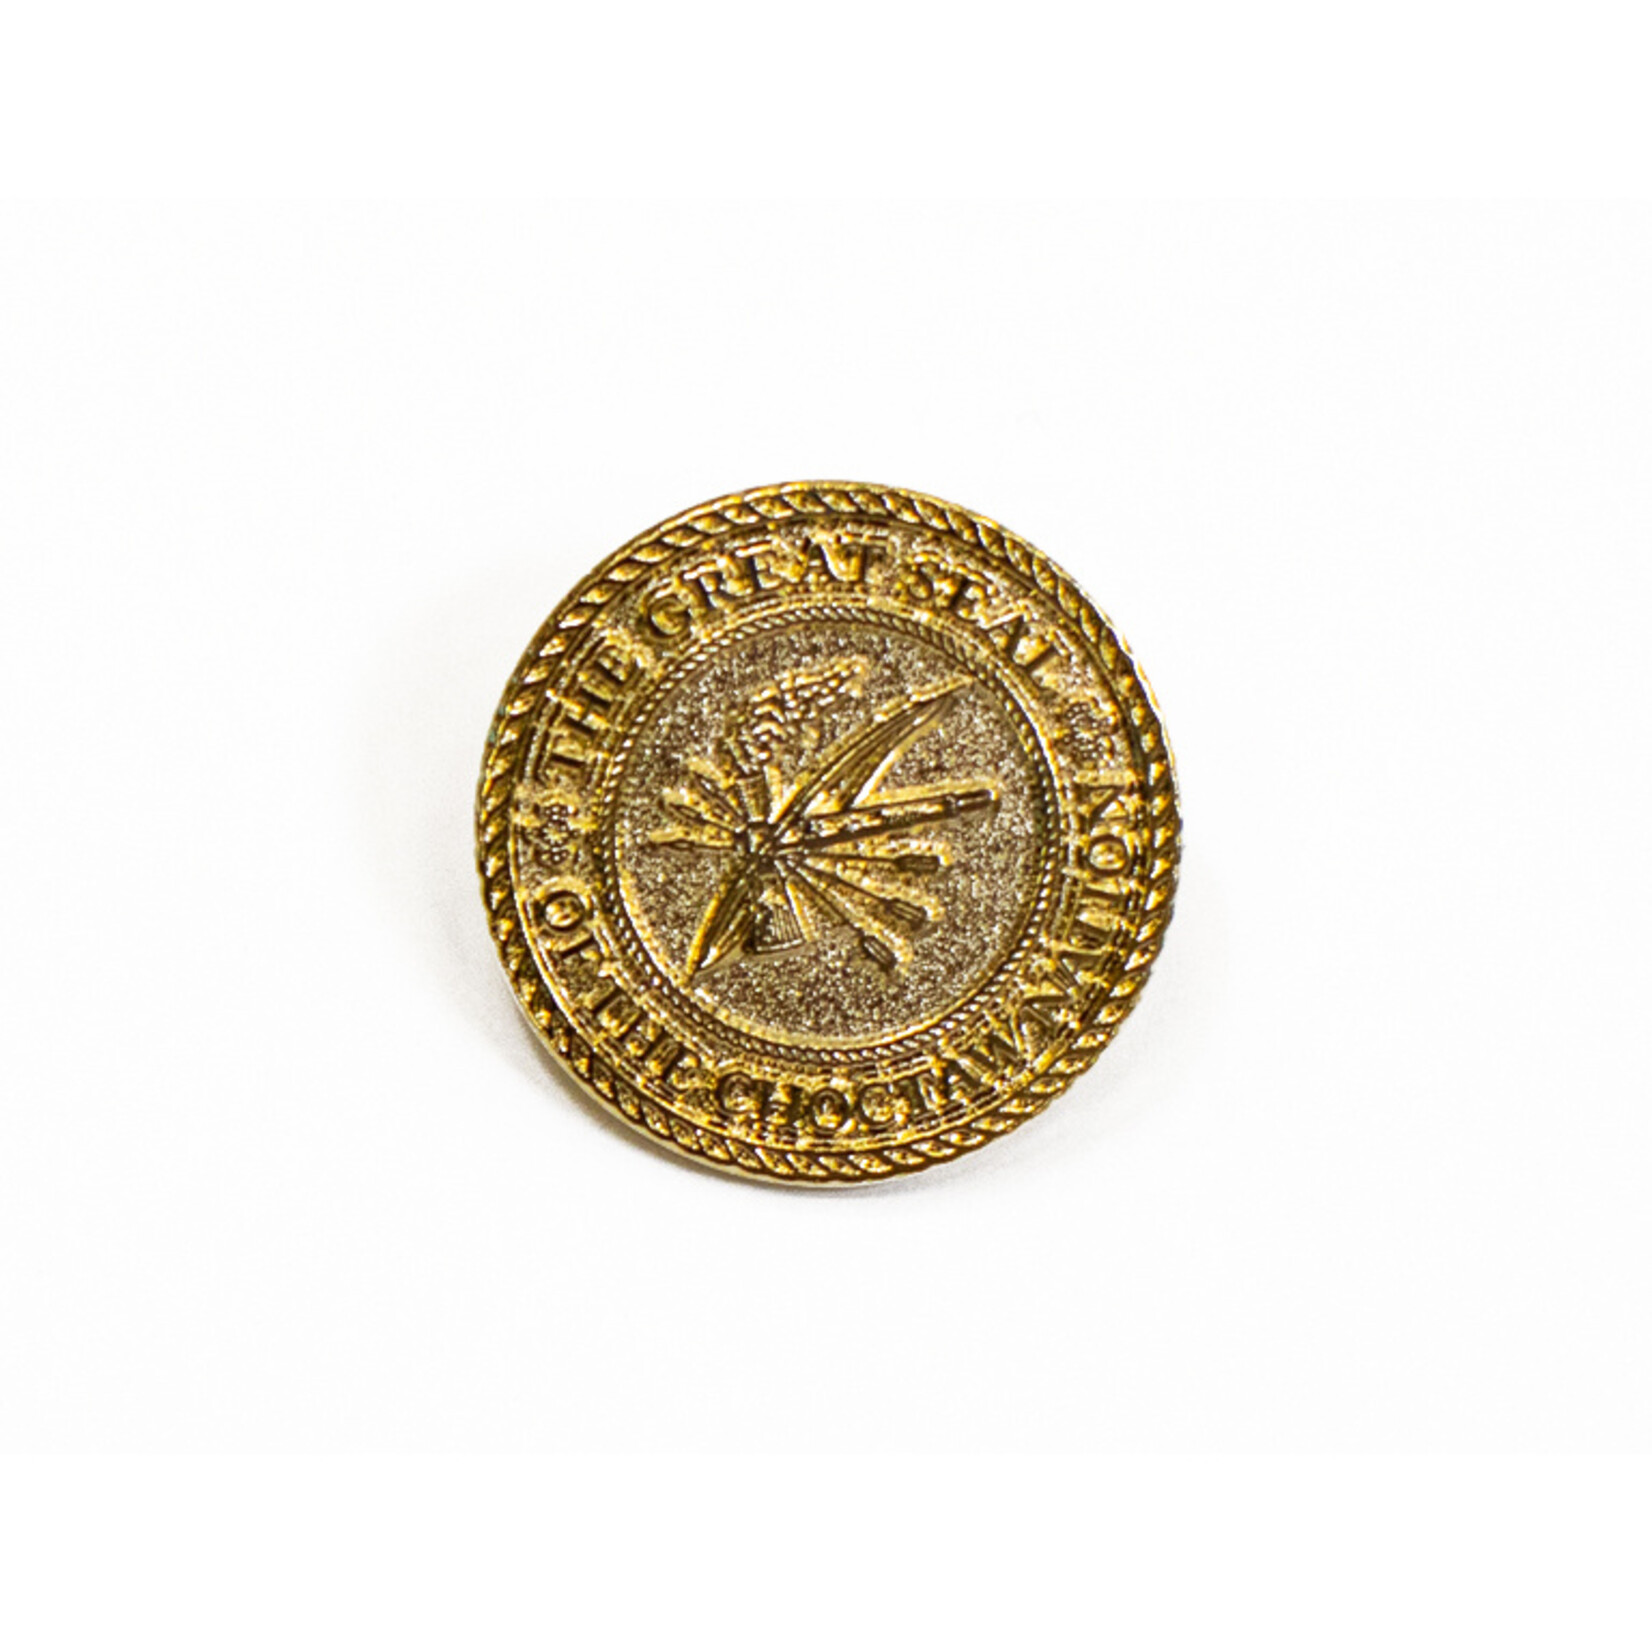 THE GREAT SEAL OF THE CHOCTAW NATION"  Gold Lapel / Hat Pin